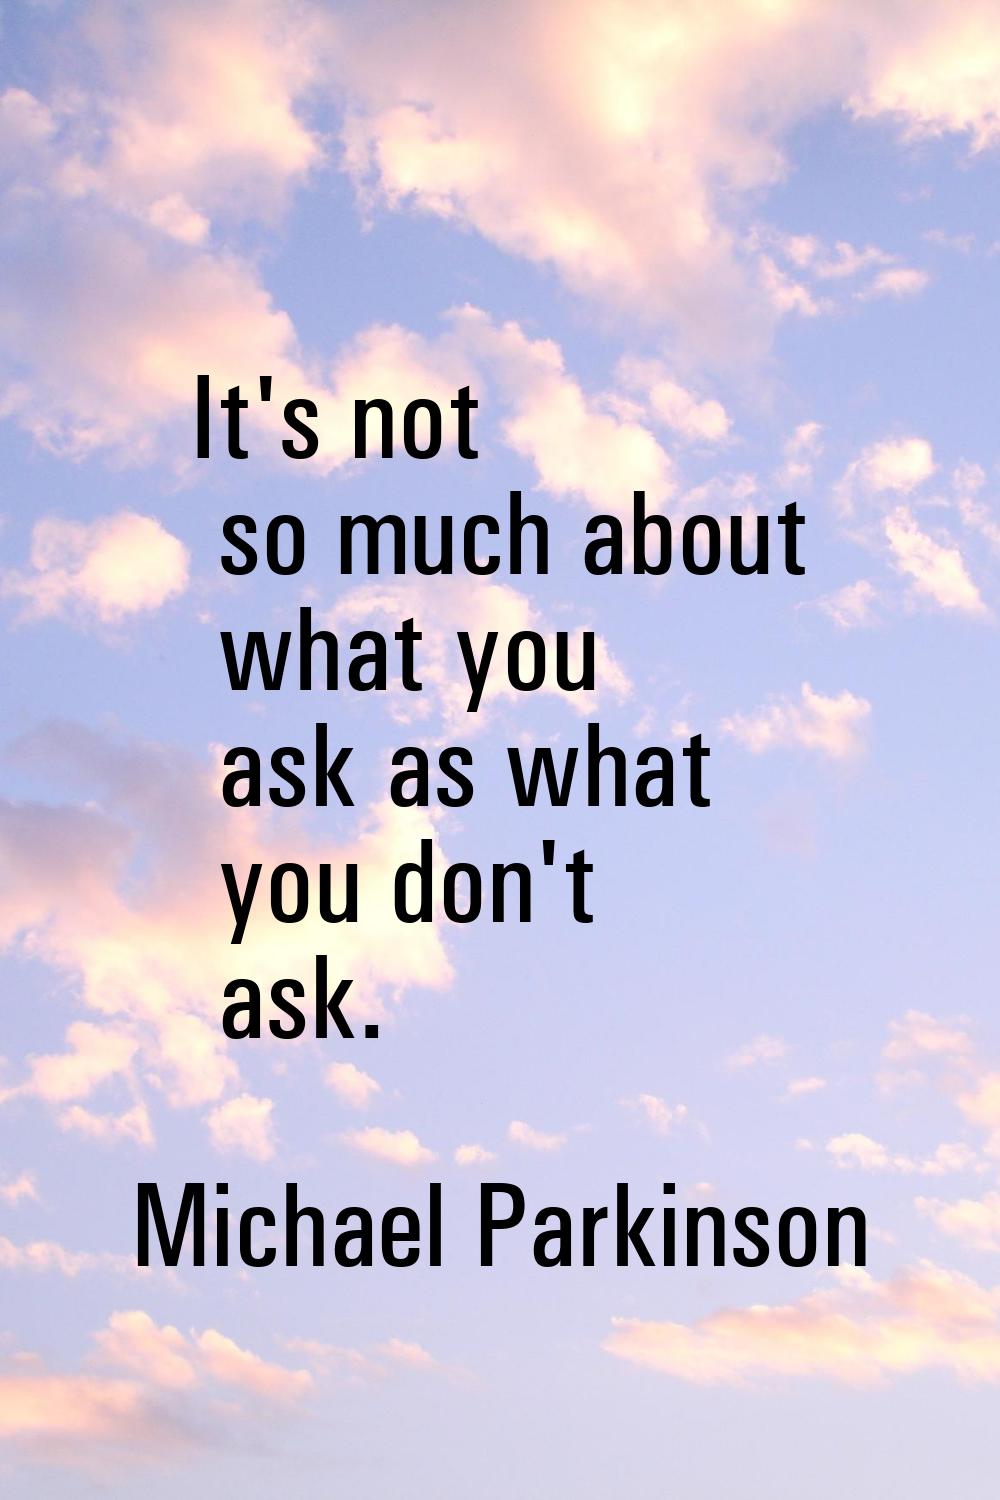 It's not so much about what you ask as what you don't ask.